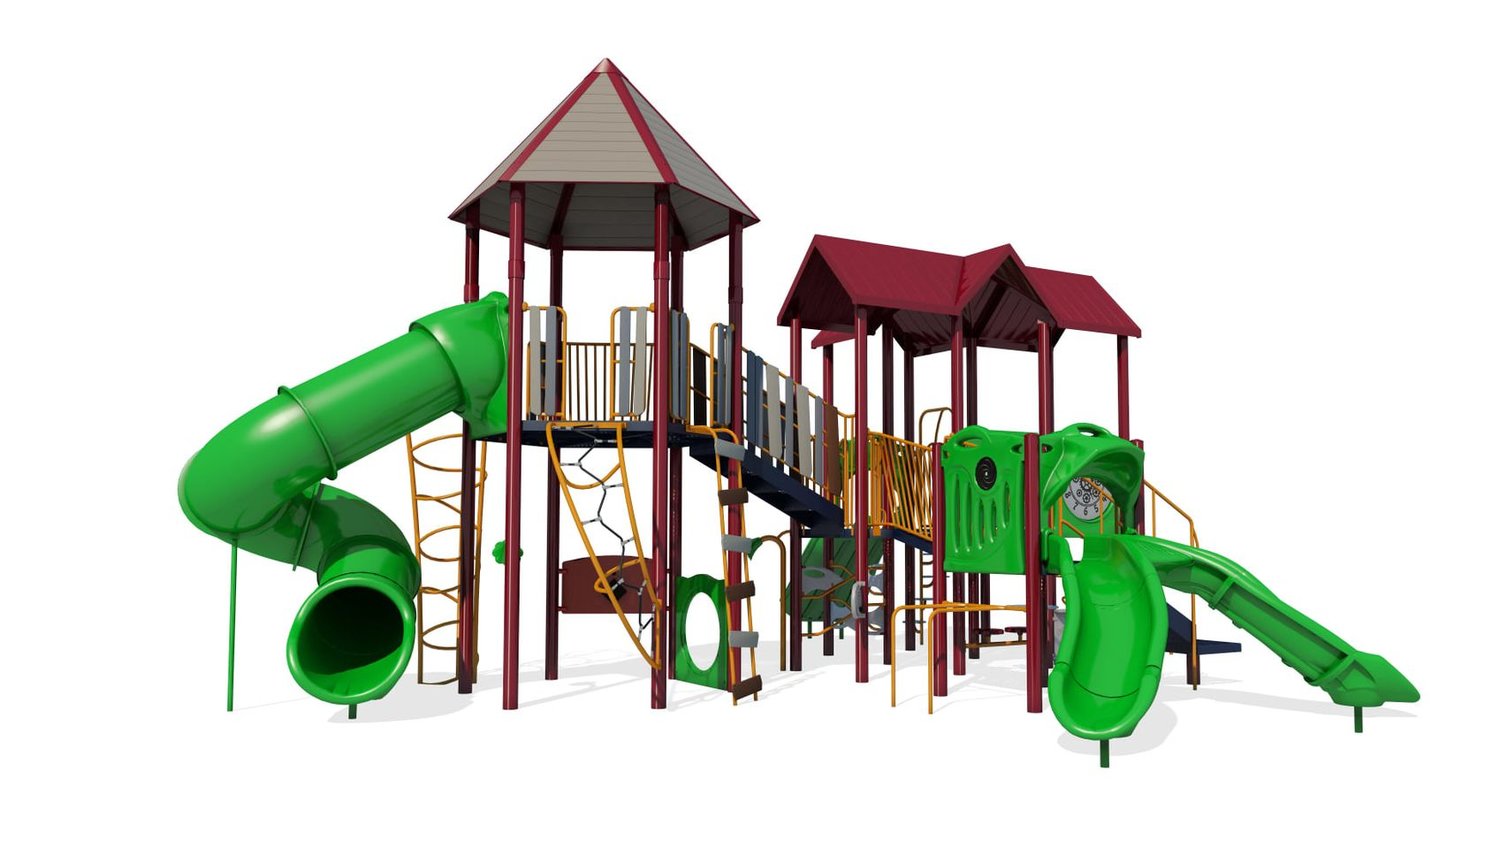 A picture of the proposed playground at Stiers Memorial Park in Rhineland.